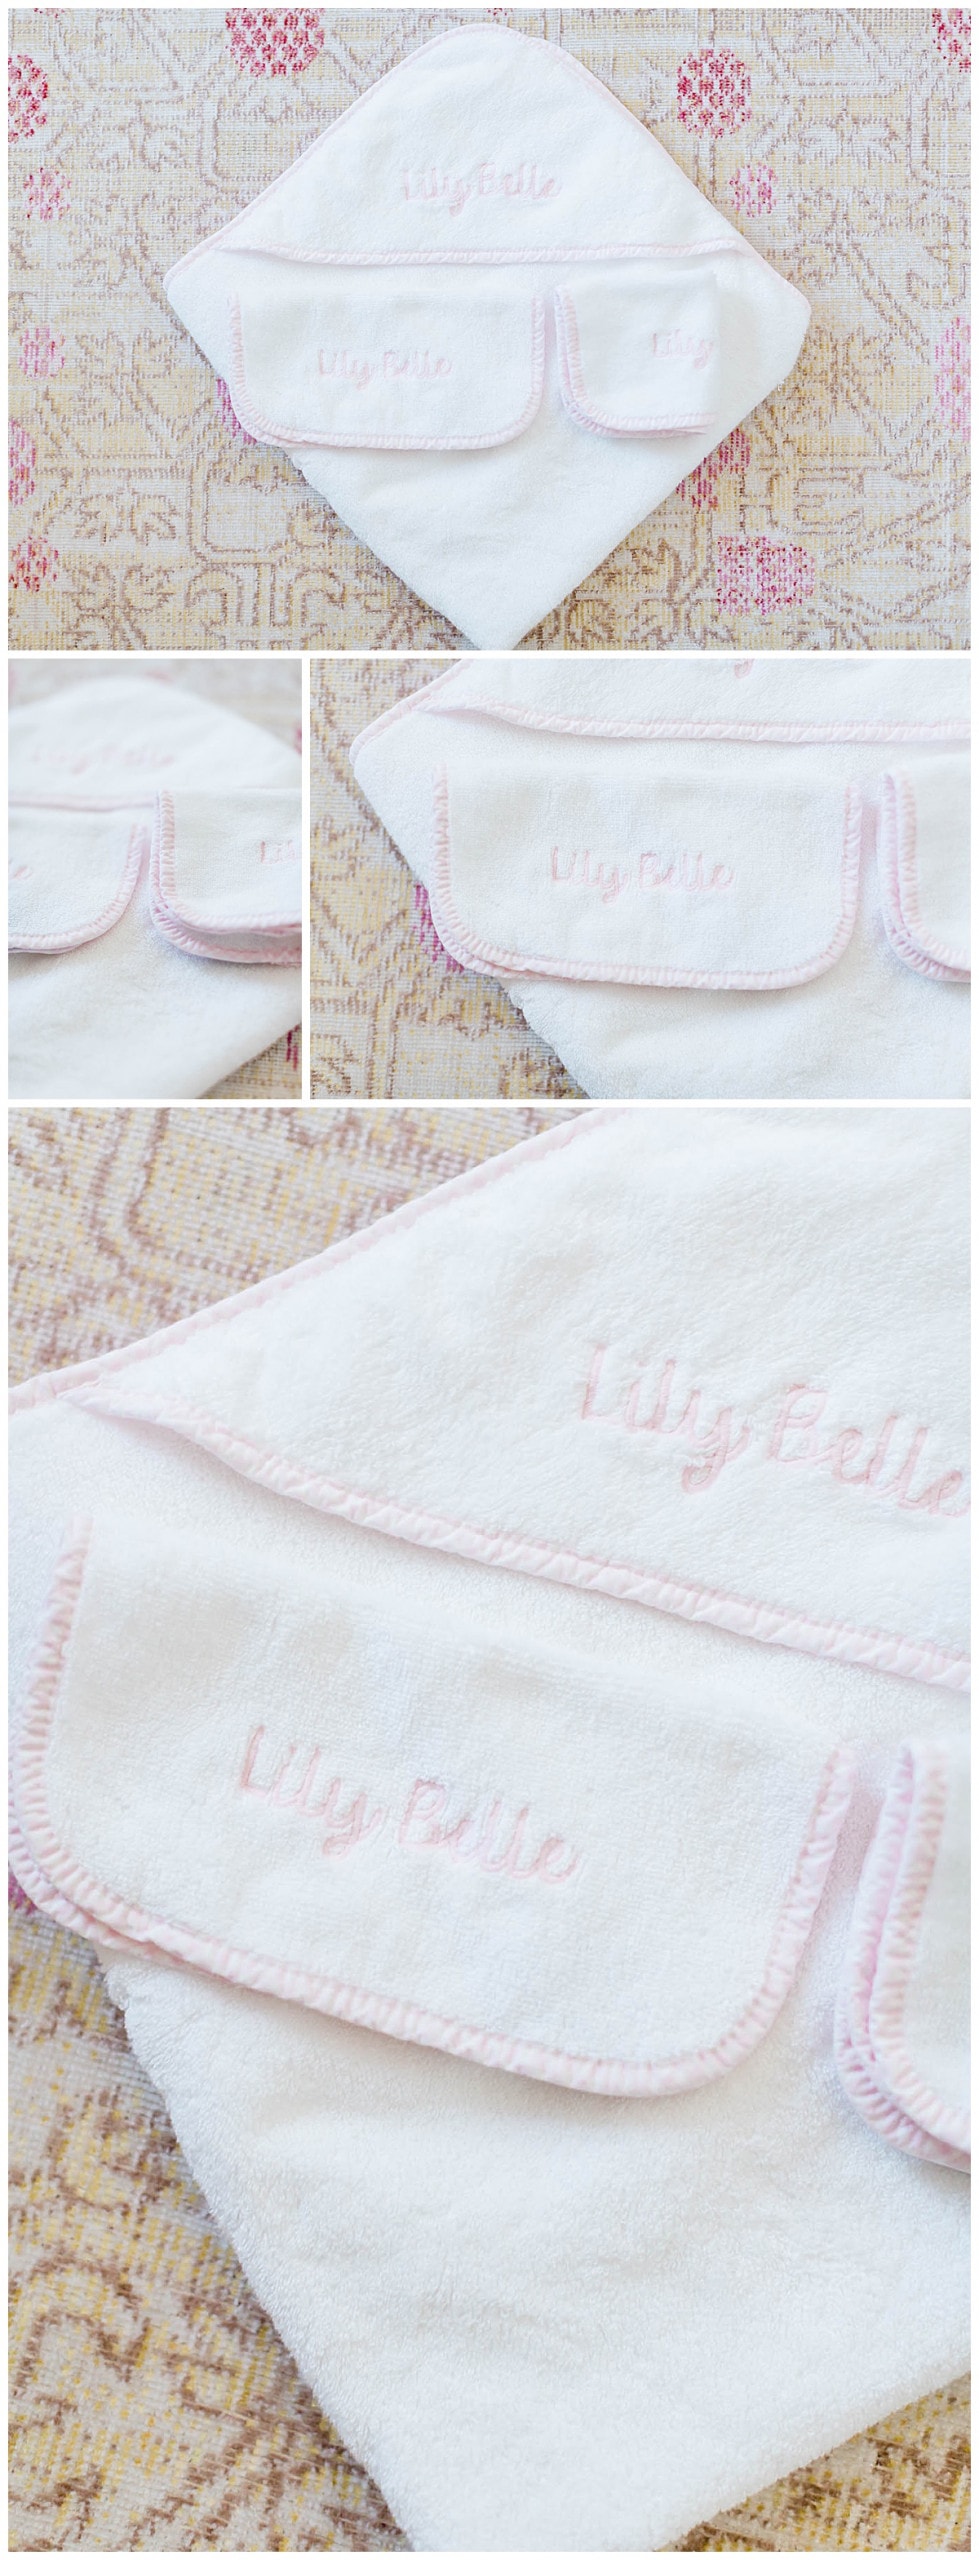 Weezie towels for baby